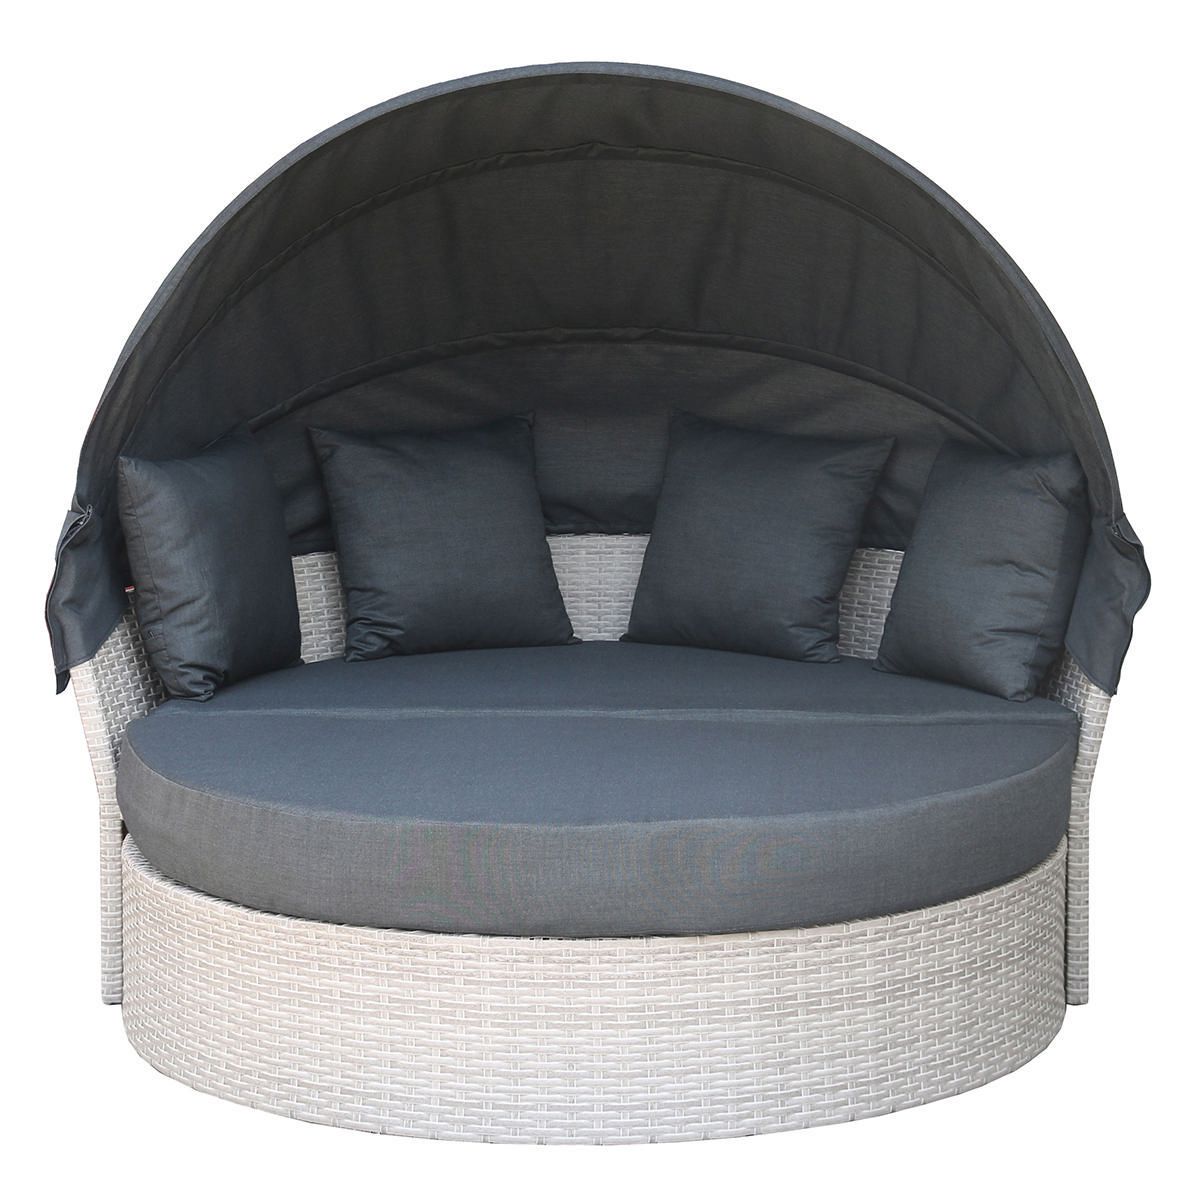 Day Bed With Cover Canada, Outdoor Bed With Canopy Canada